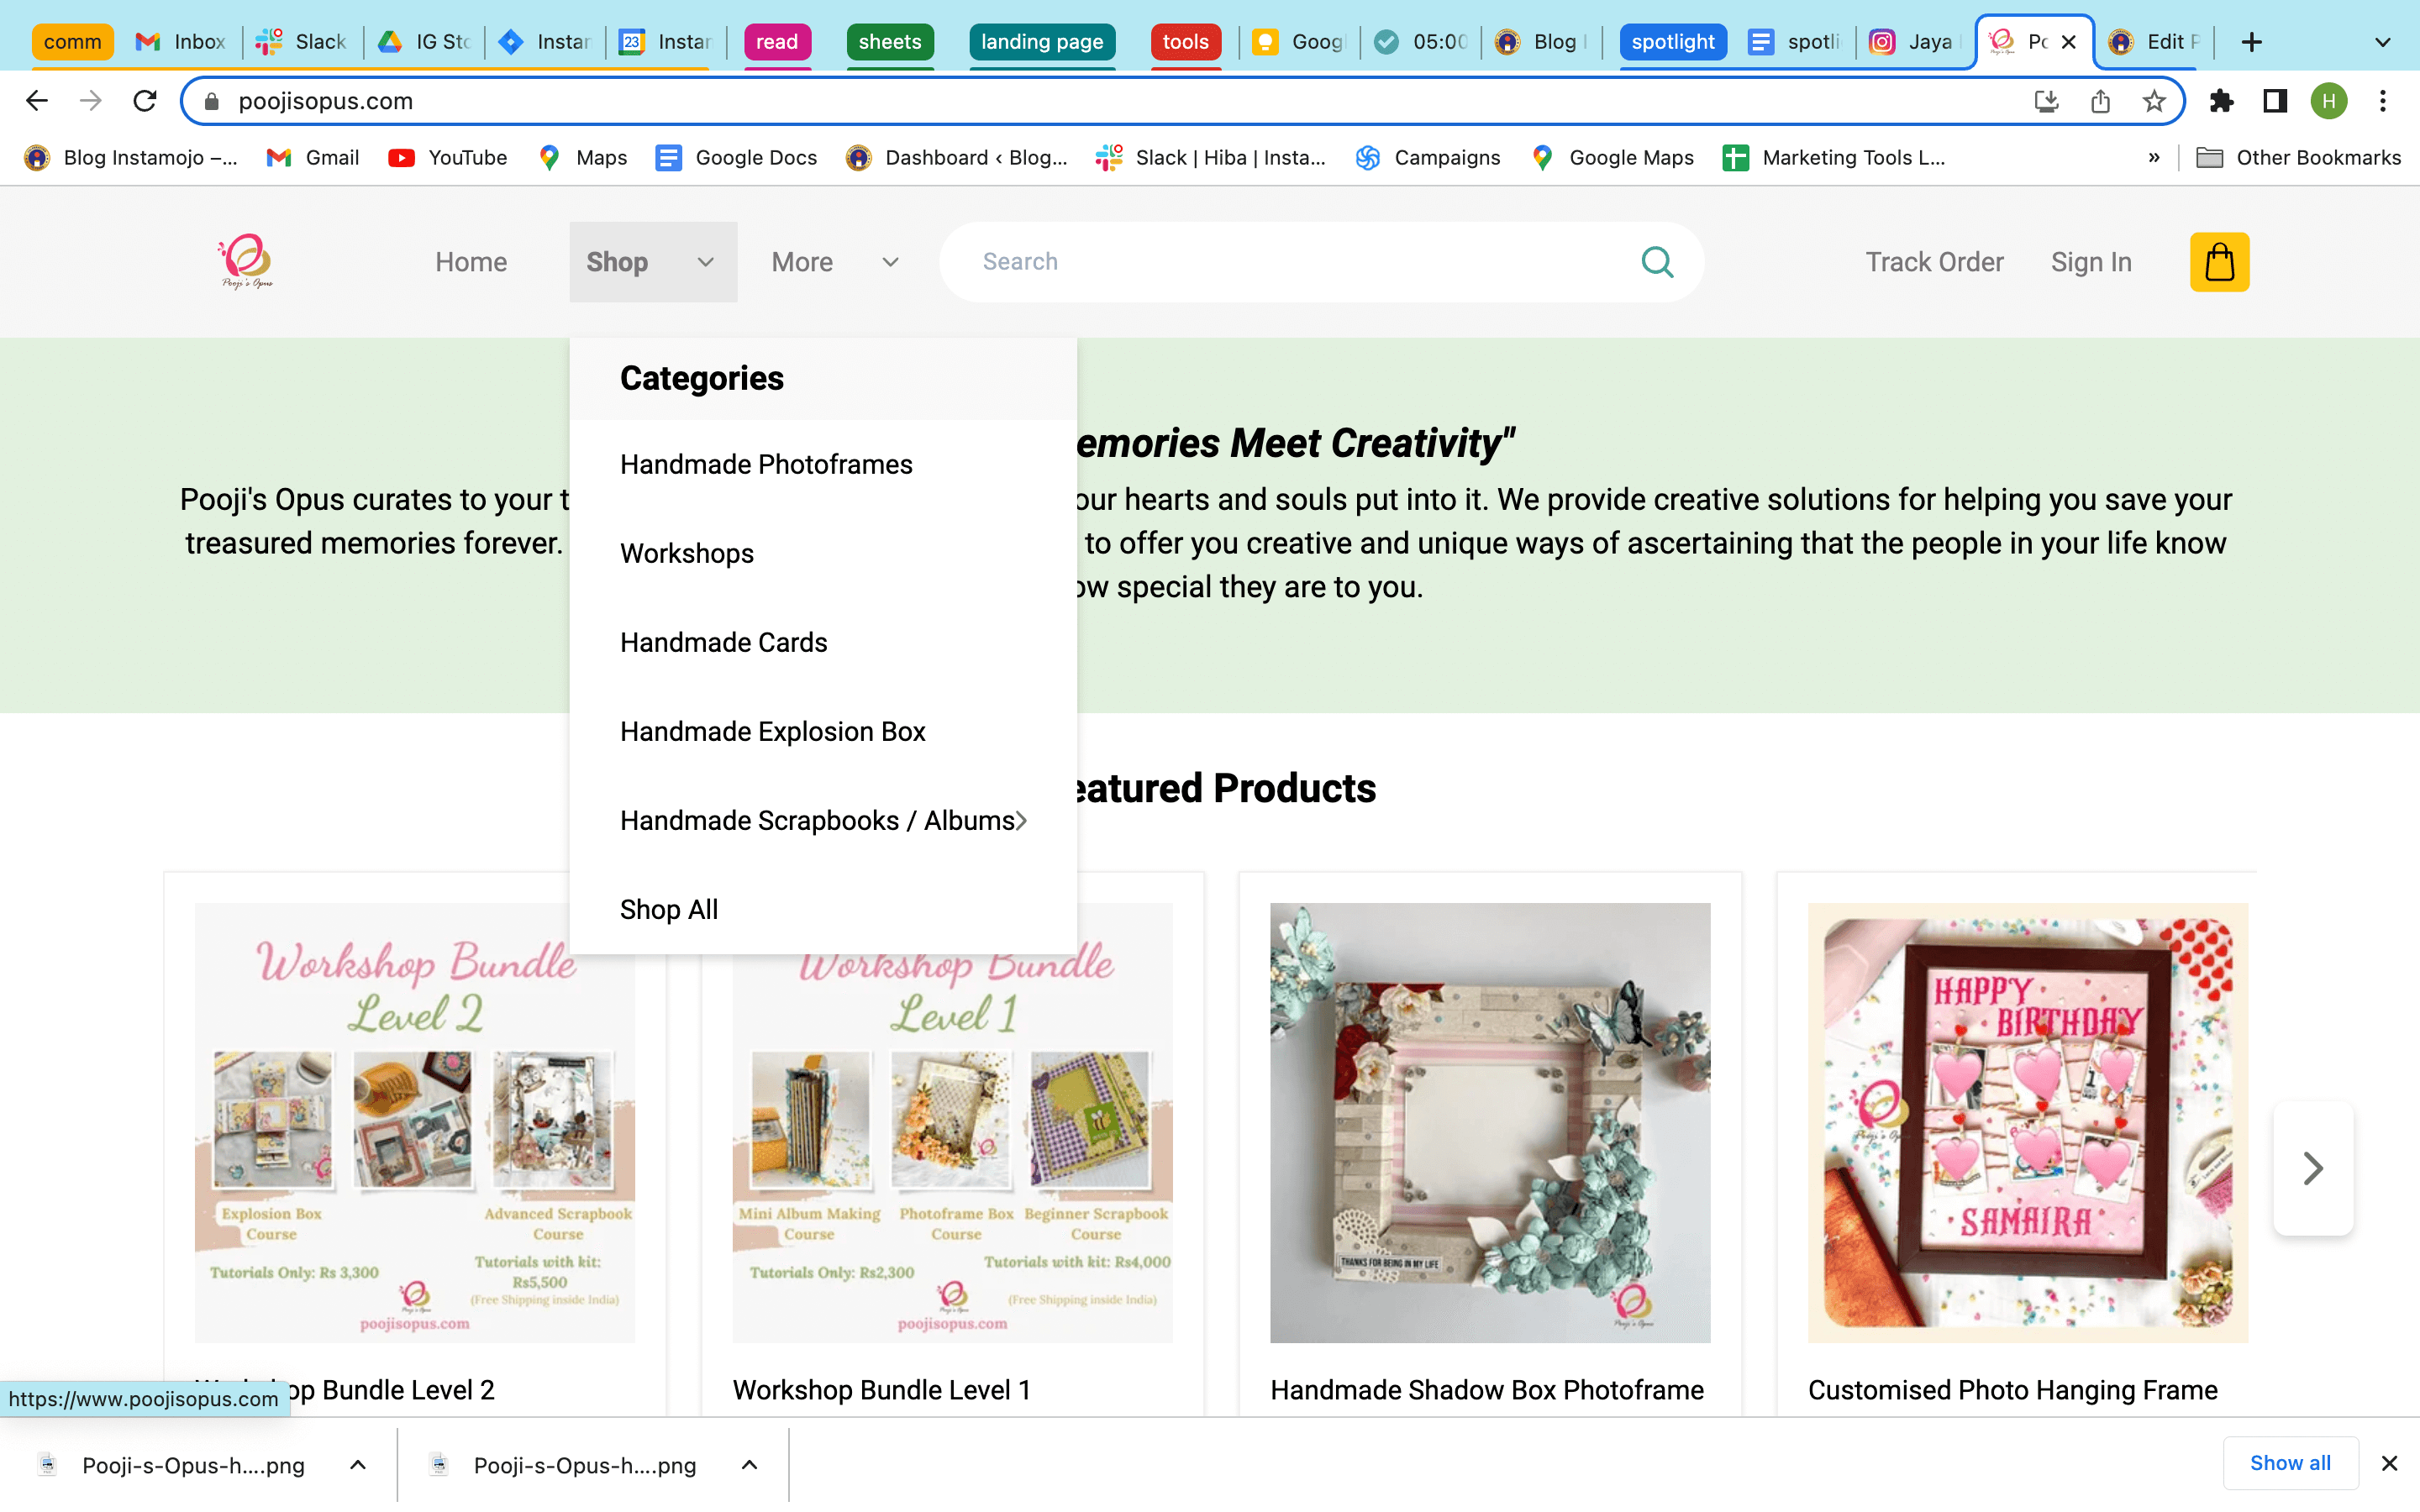 online store categories and structure